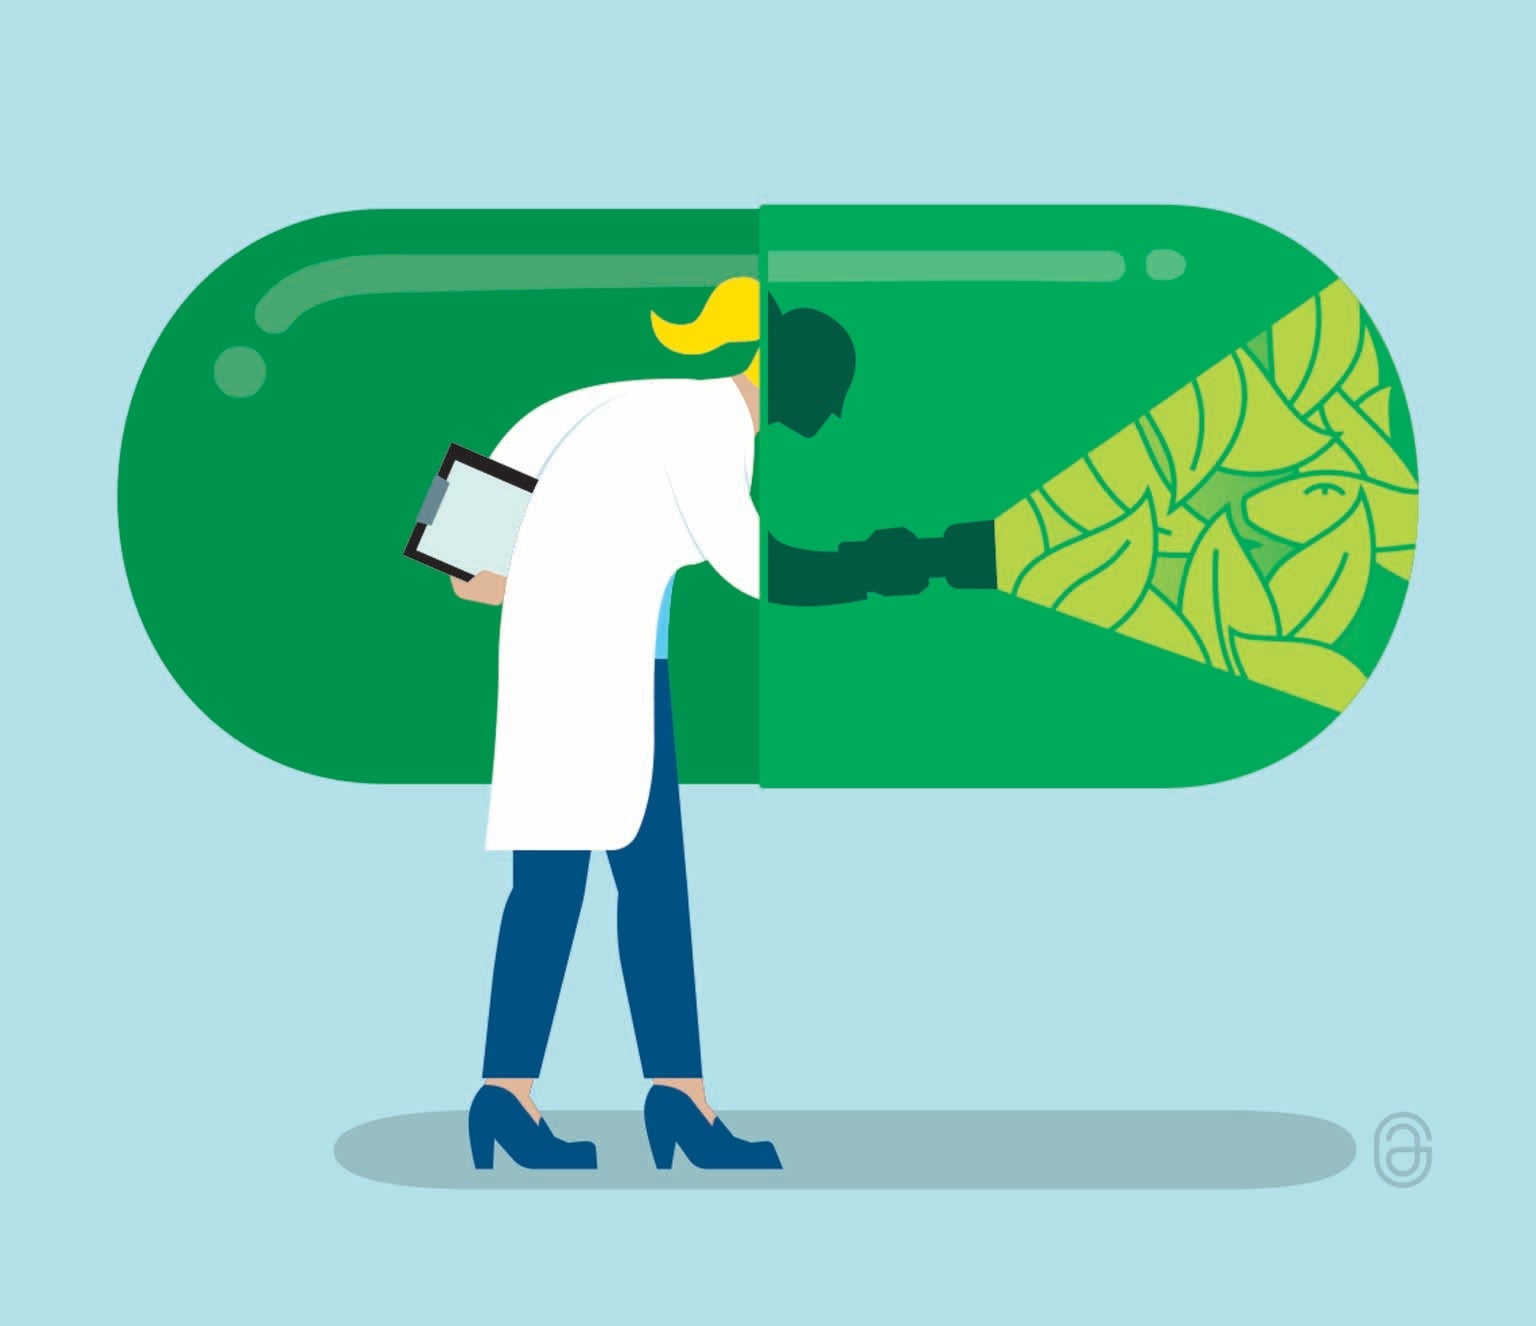 We Need to Better Regulate Nutraceuticals